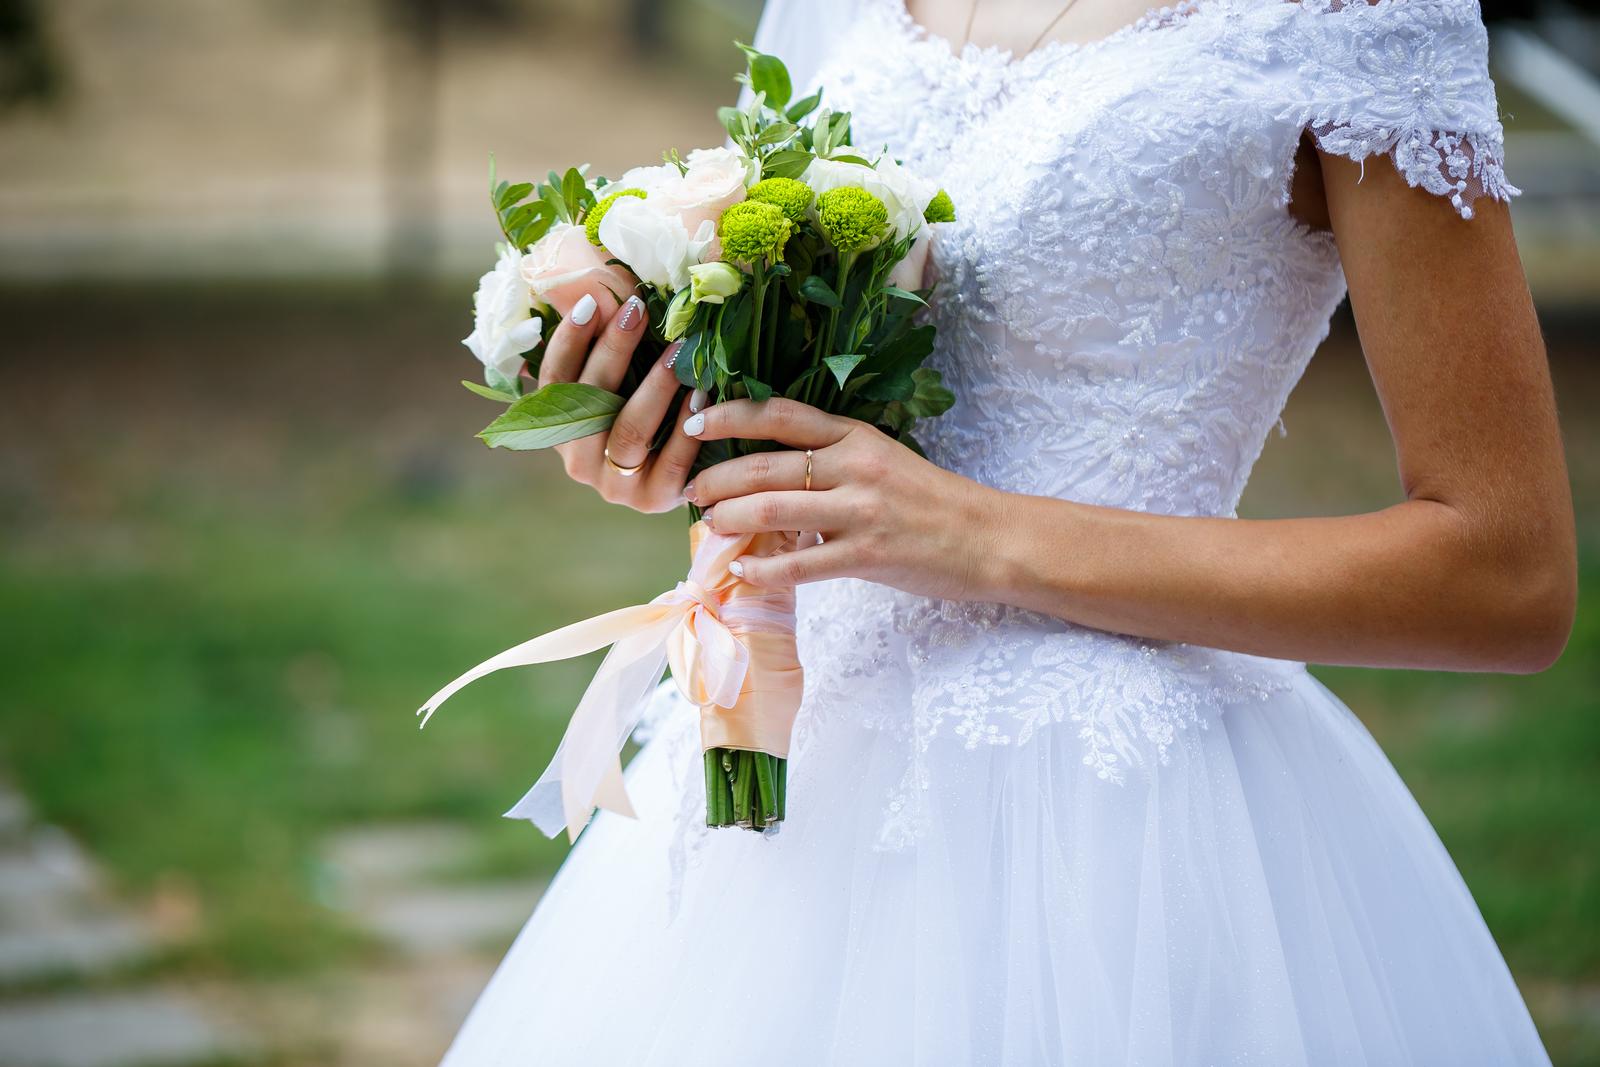 How to finish a hand-tied wedding bouquet
